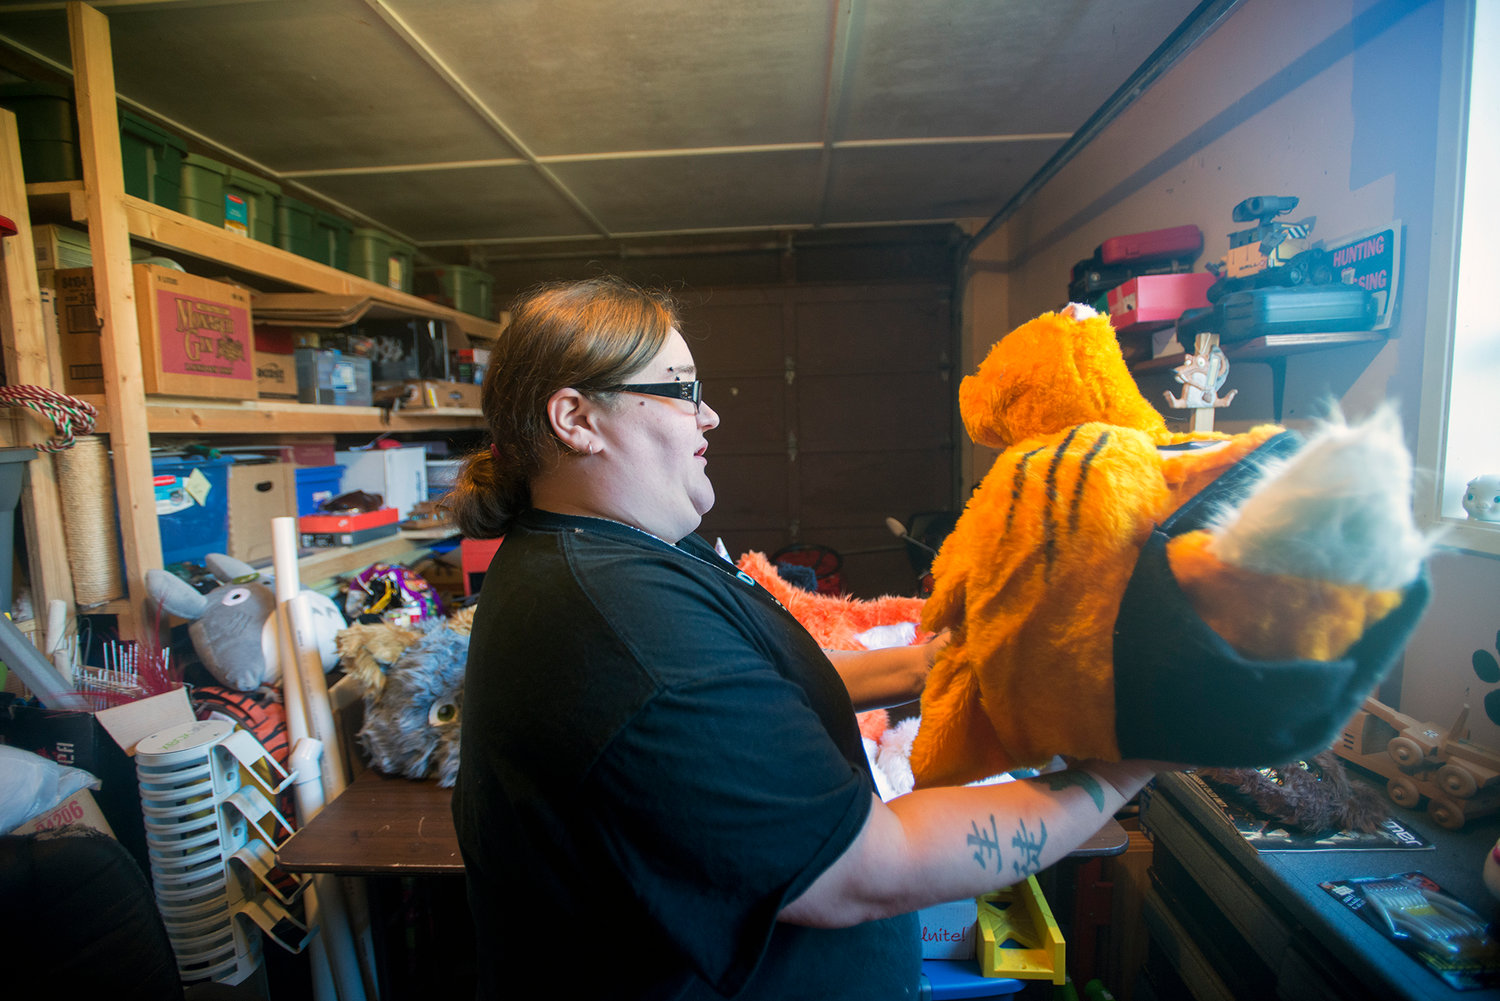 Amanda Grary holds up a costume head that she designed and built from scratch at her home in Centralia on Tuesday, Nov. 11.